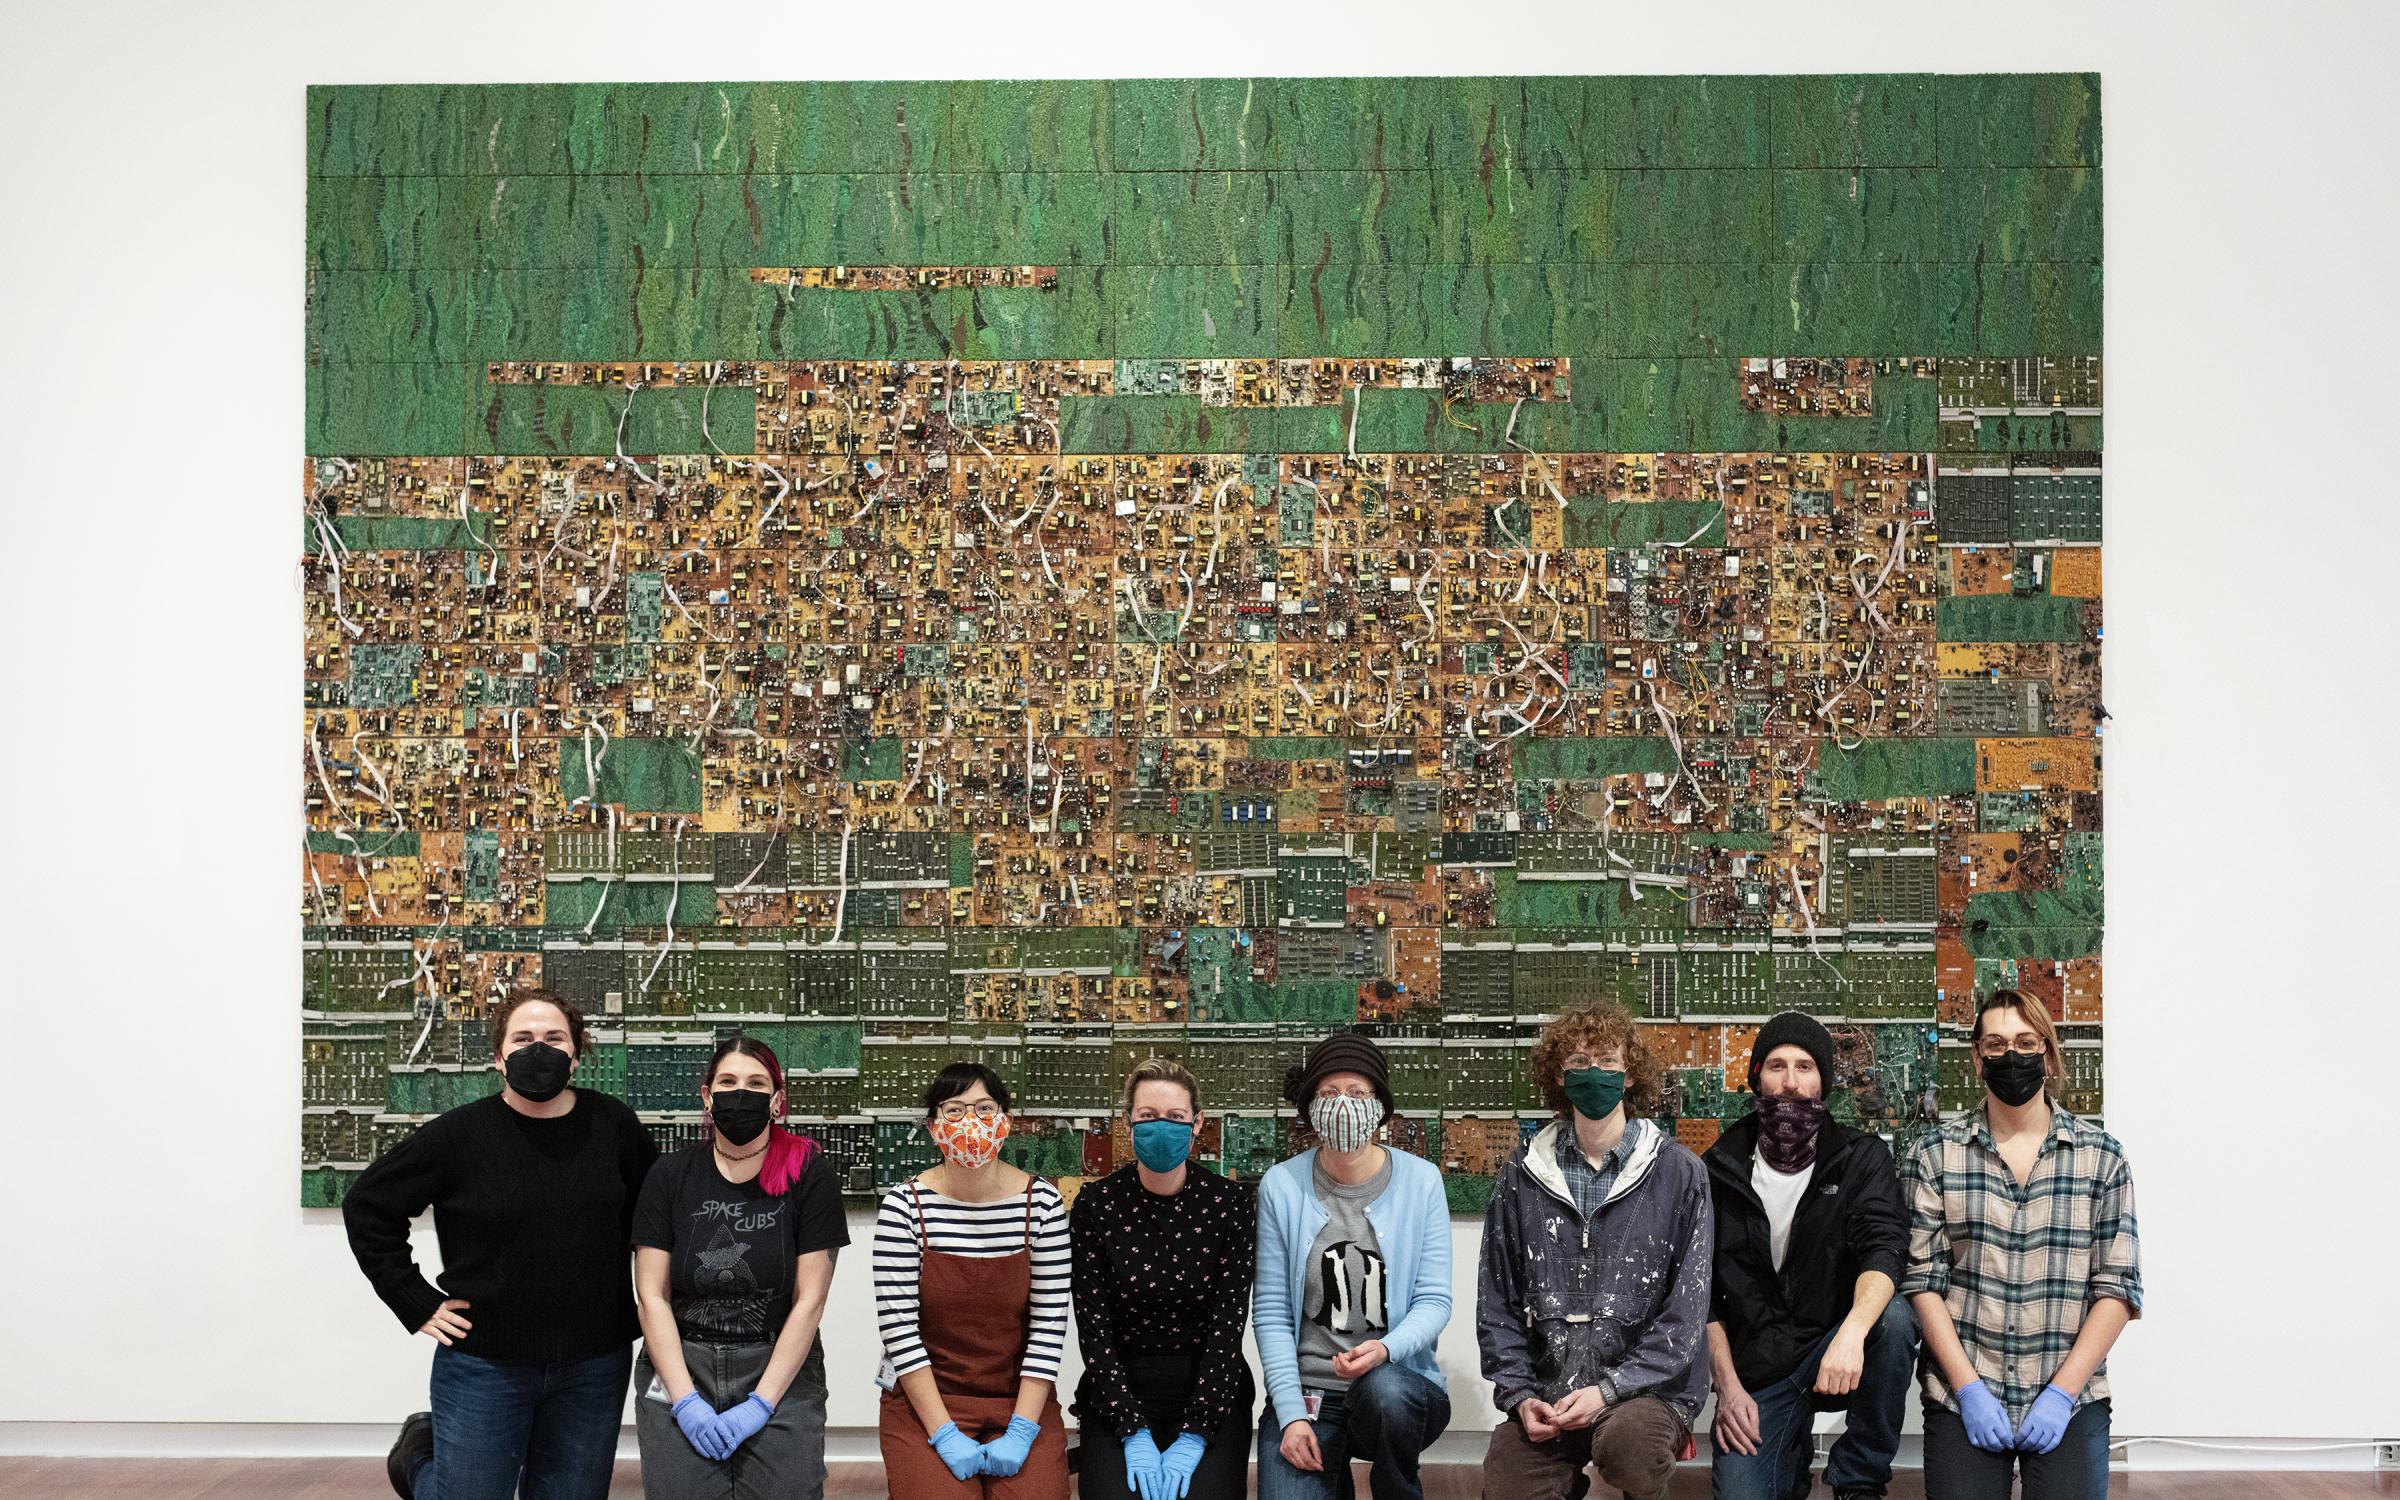 The UMFA collections and prepatory team proudly sits in front of "Tightrope" by Elias Sime. This wall sculpture is made up of 131 panels and took a week to install. 